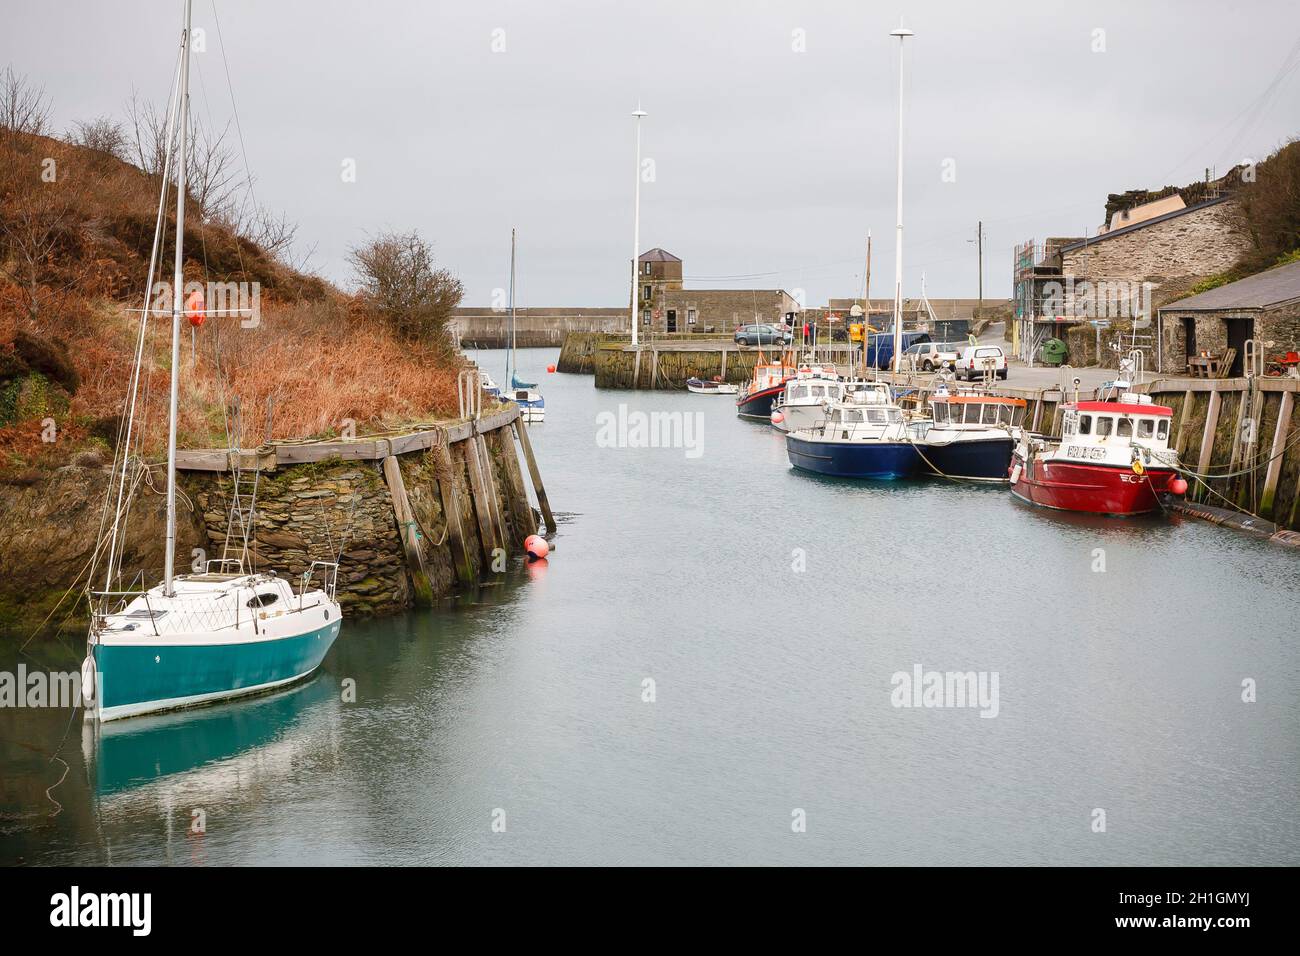 ANGLESEY, UK - February 28, 2012. Yacht and fishing boats in an old harbour, Amlwch Port, Anglesey, Wales Stock Photo